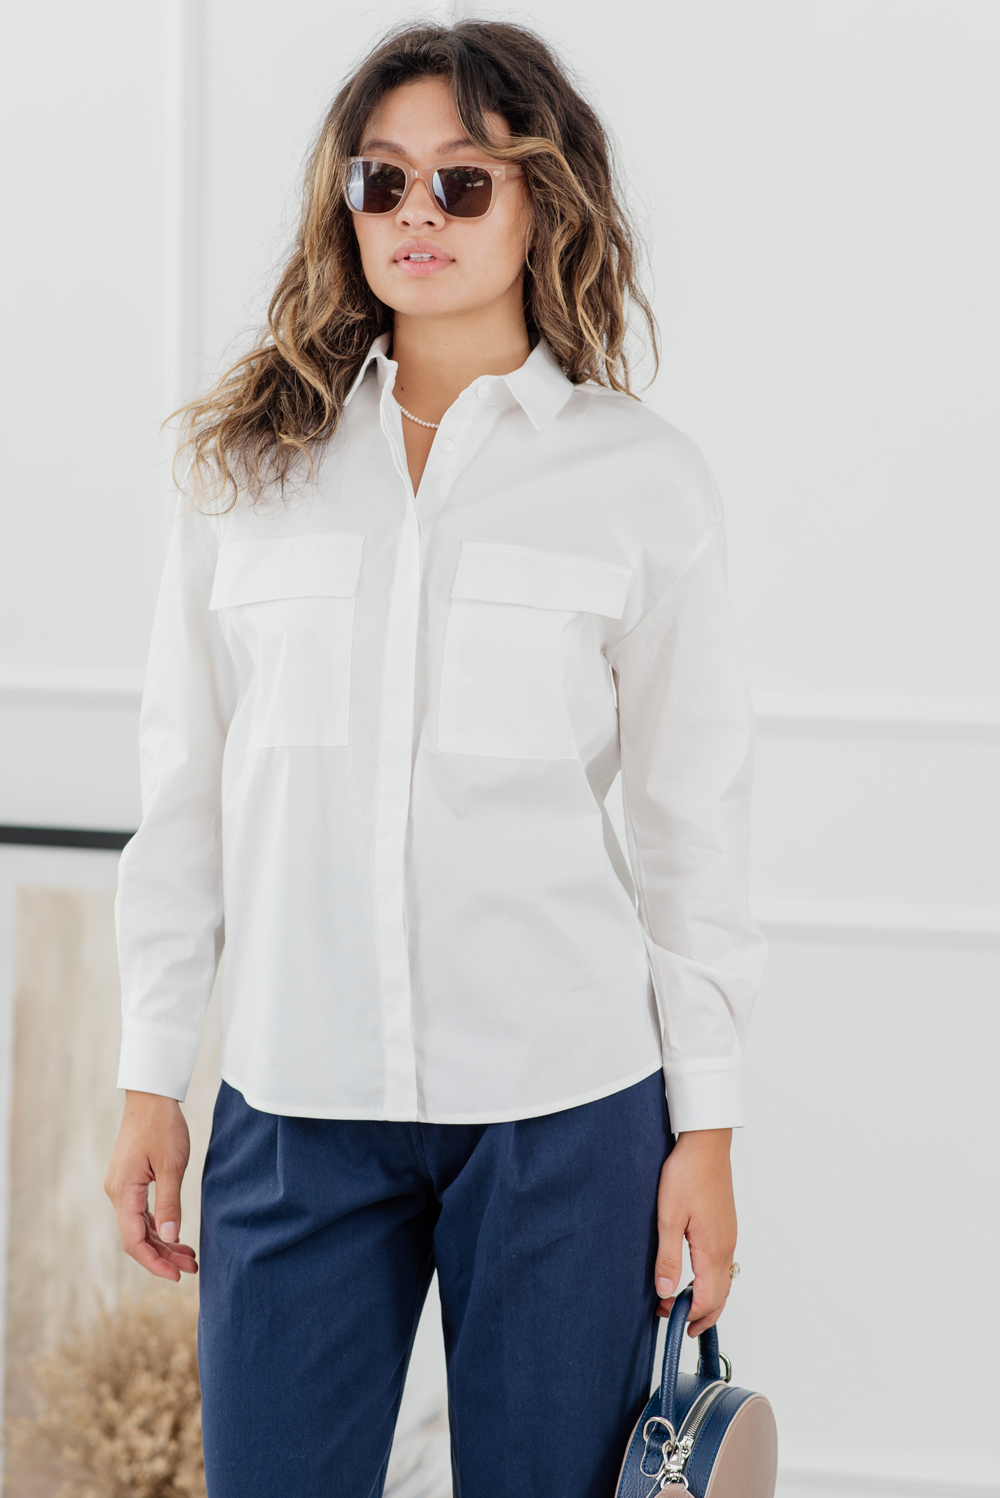 Milk shirt with large pockets